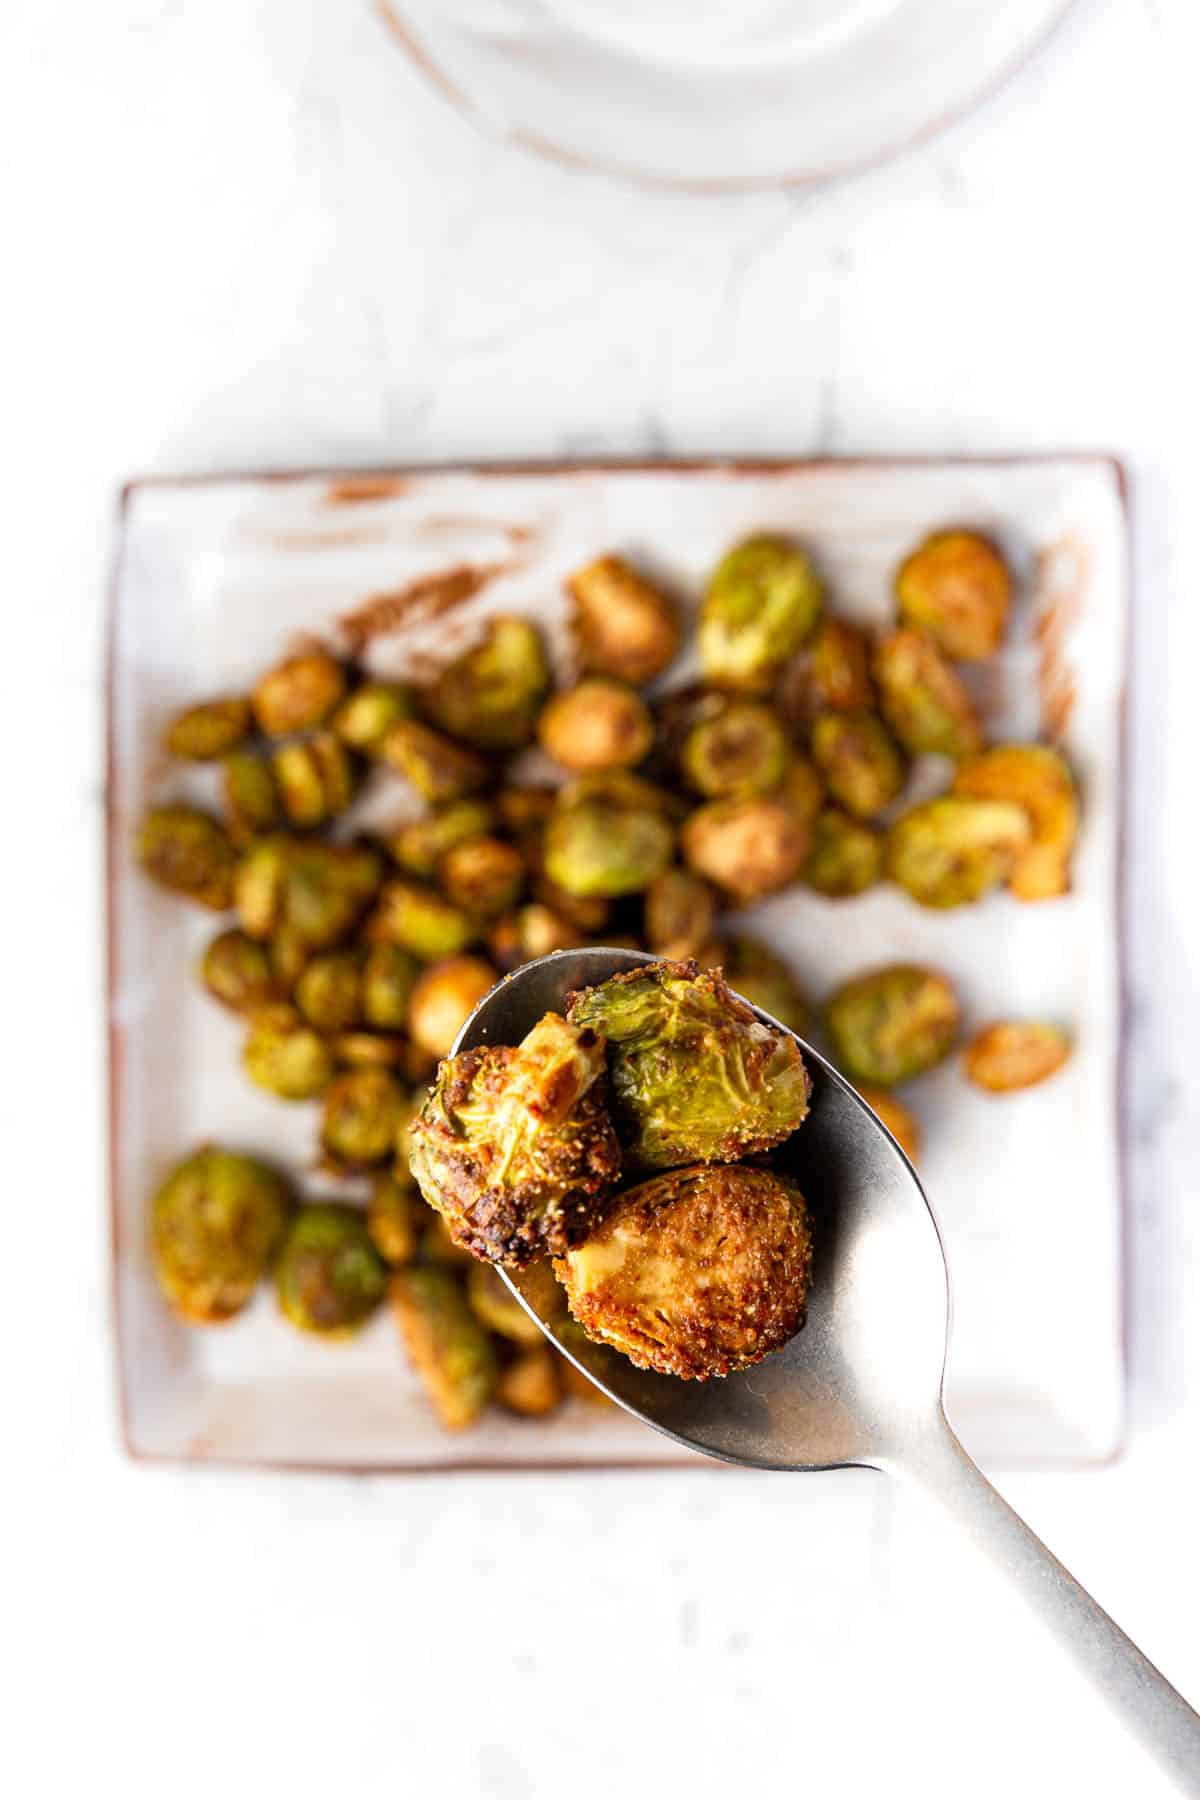 A square plate of maple balsamic roasted brussels sprouts with a spoon holding some hovering above.